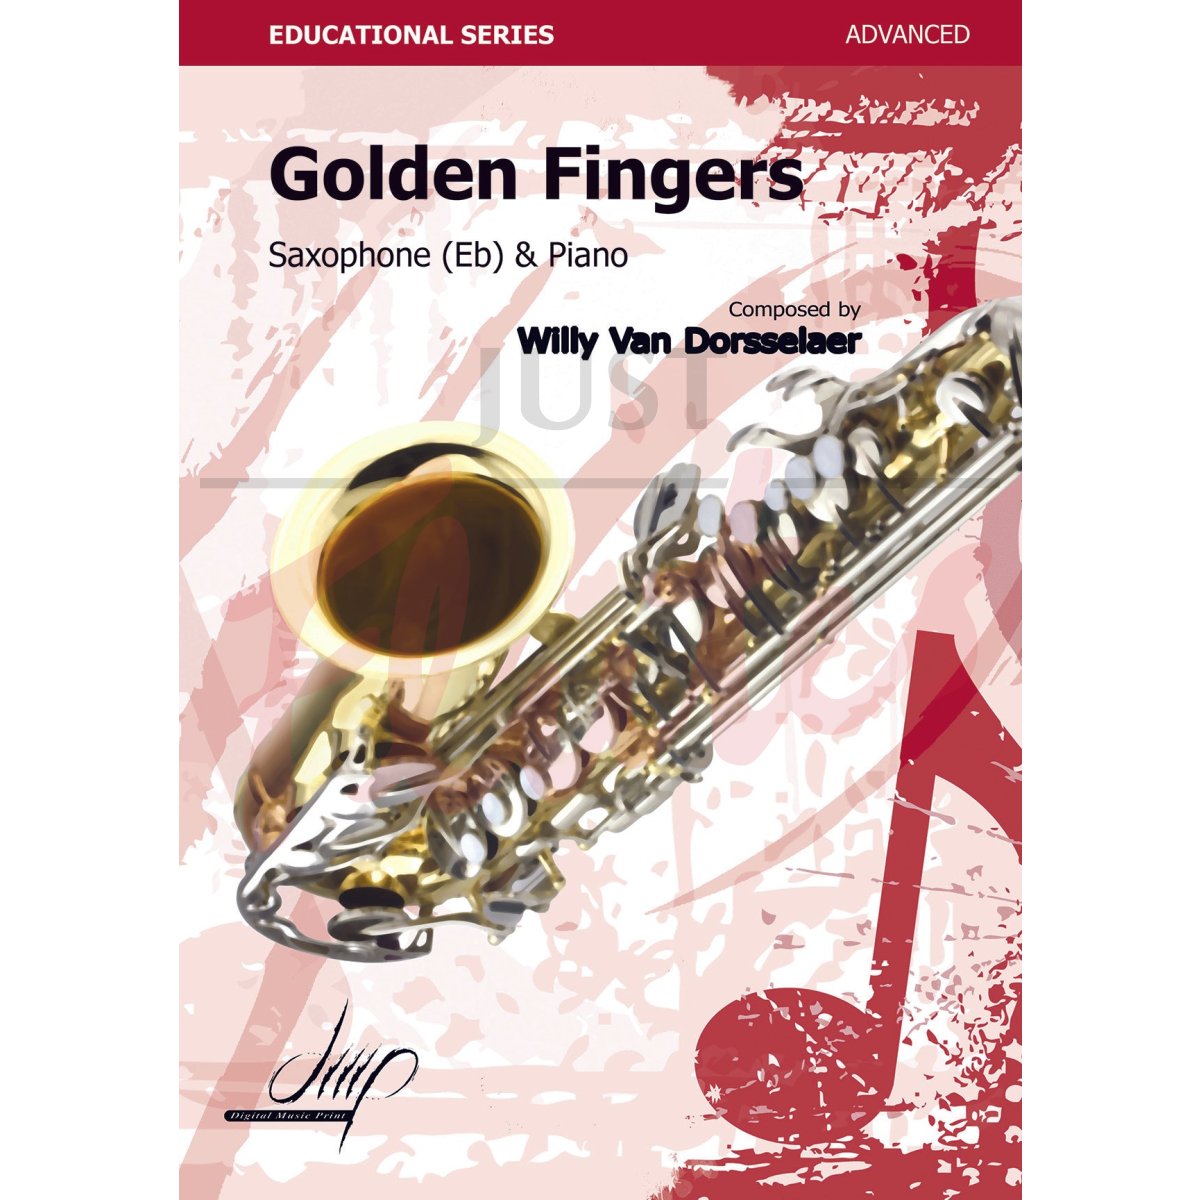 Golden Fingers for Alto Saxophone and Piano